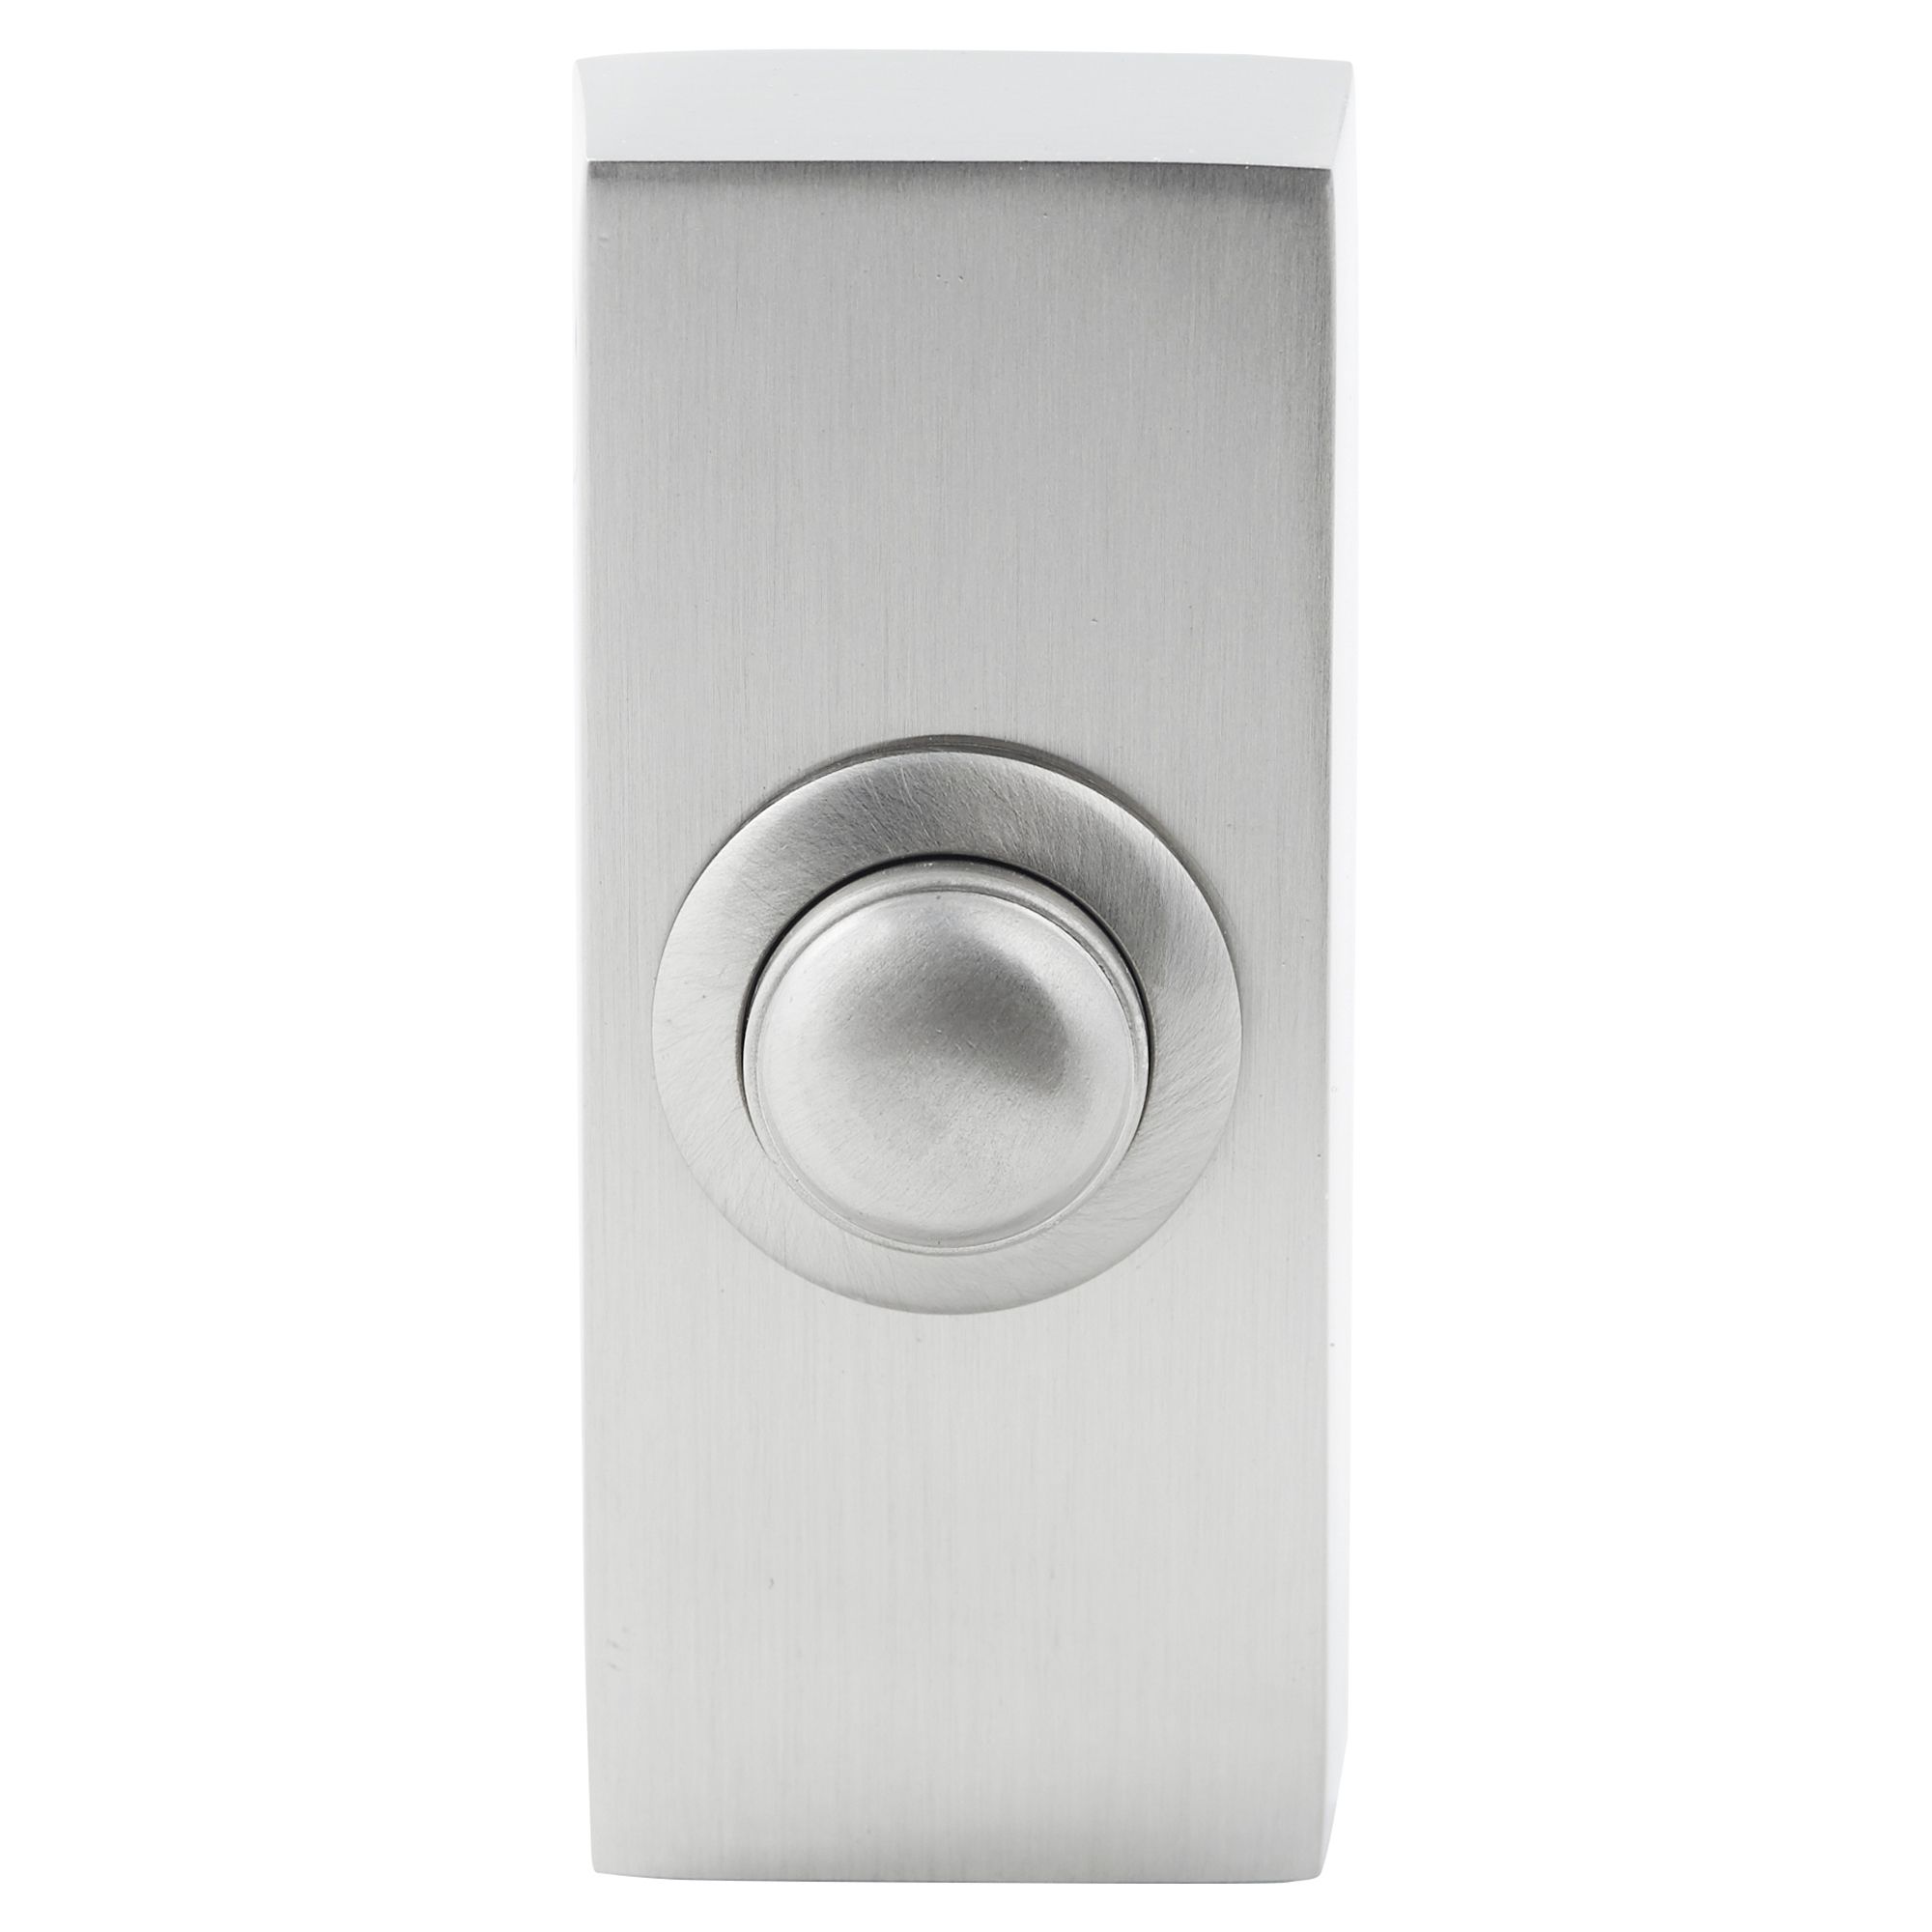 Byron Brushed Nickel effect Wired - 2 wires Bell push